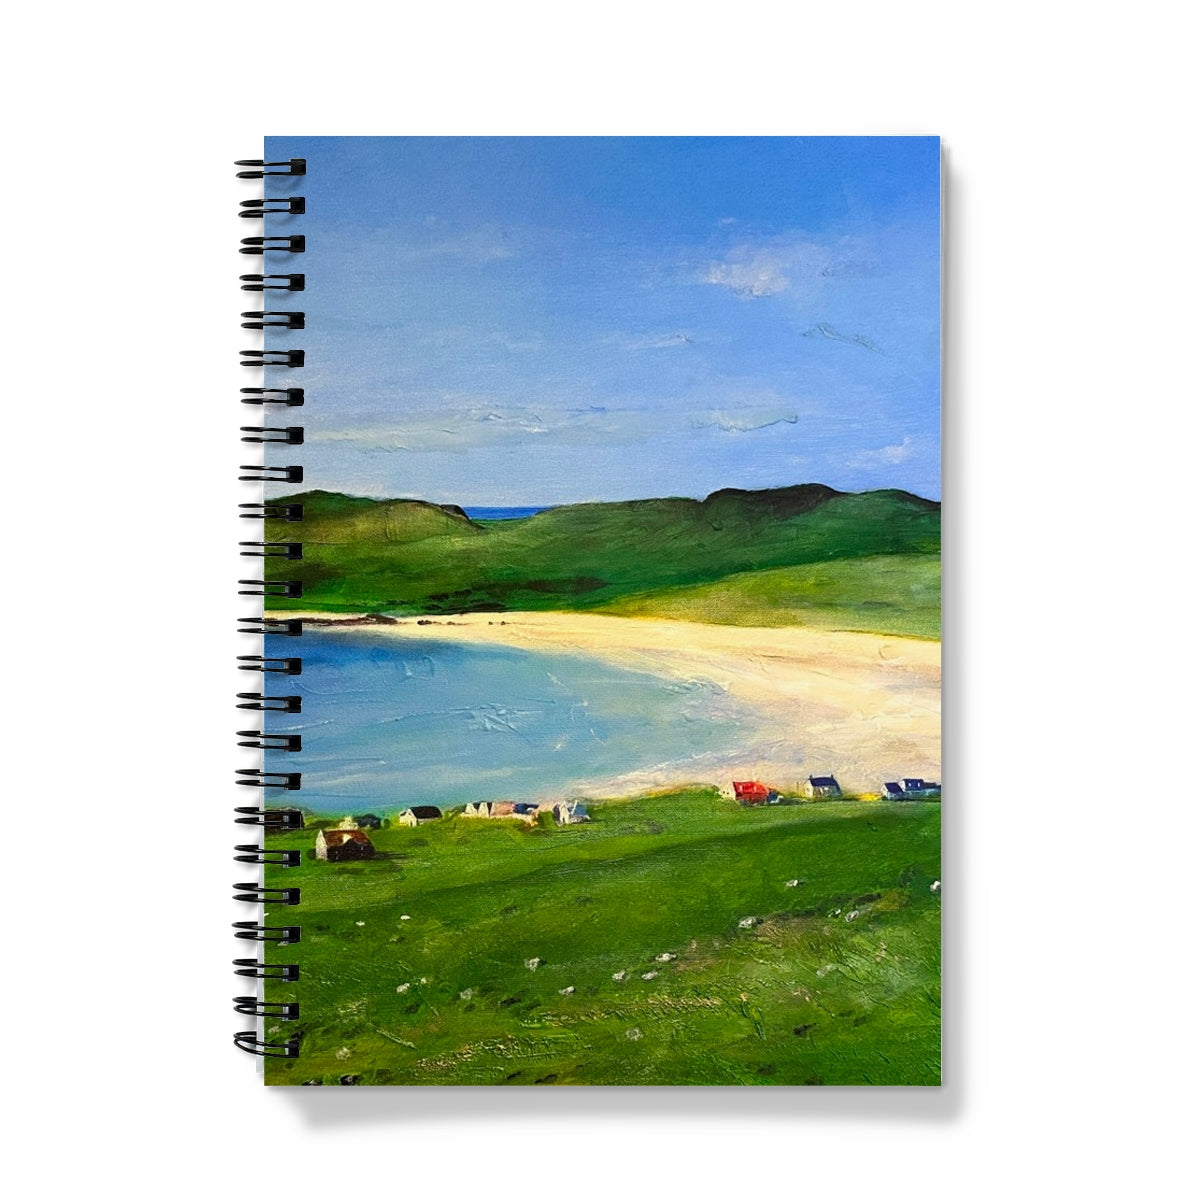 Balephuil Beach Tiree Art Gifts Notebook-Journals & Notebooks-Hebridean Islands Art Gallery-A4-Lined-Paintings, Prints, Homeware, Art Gifts From Scotland By Scottish Artist Kevin Hunter